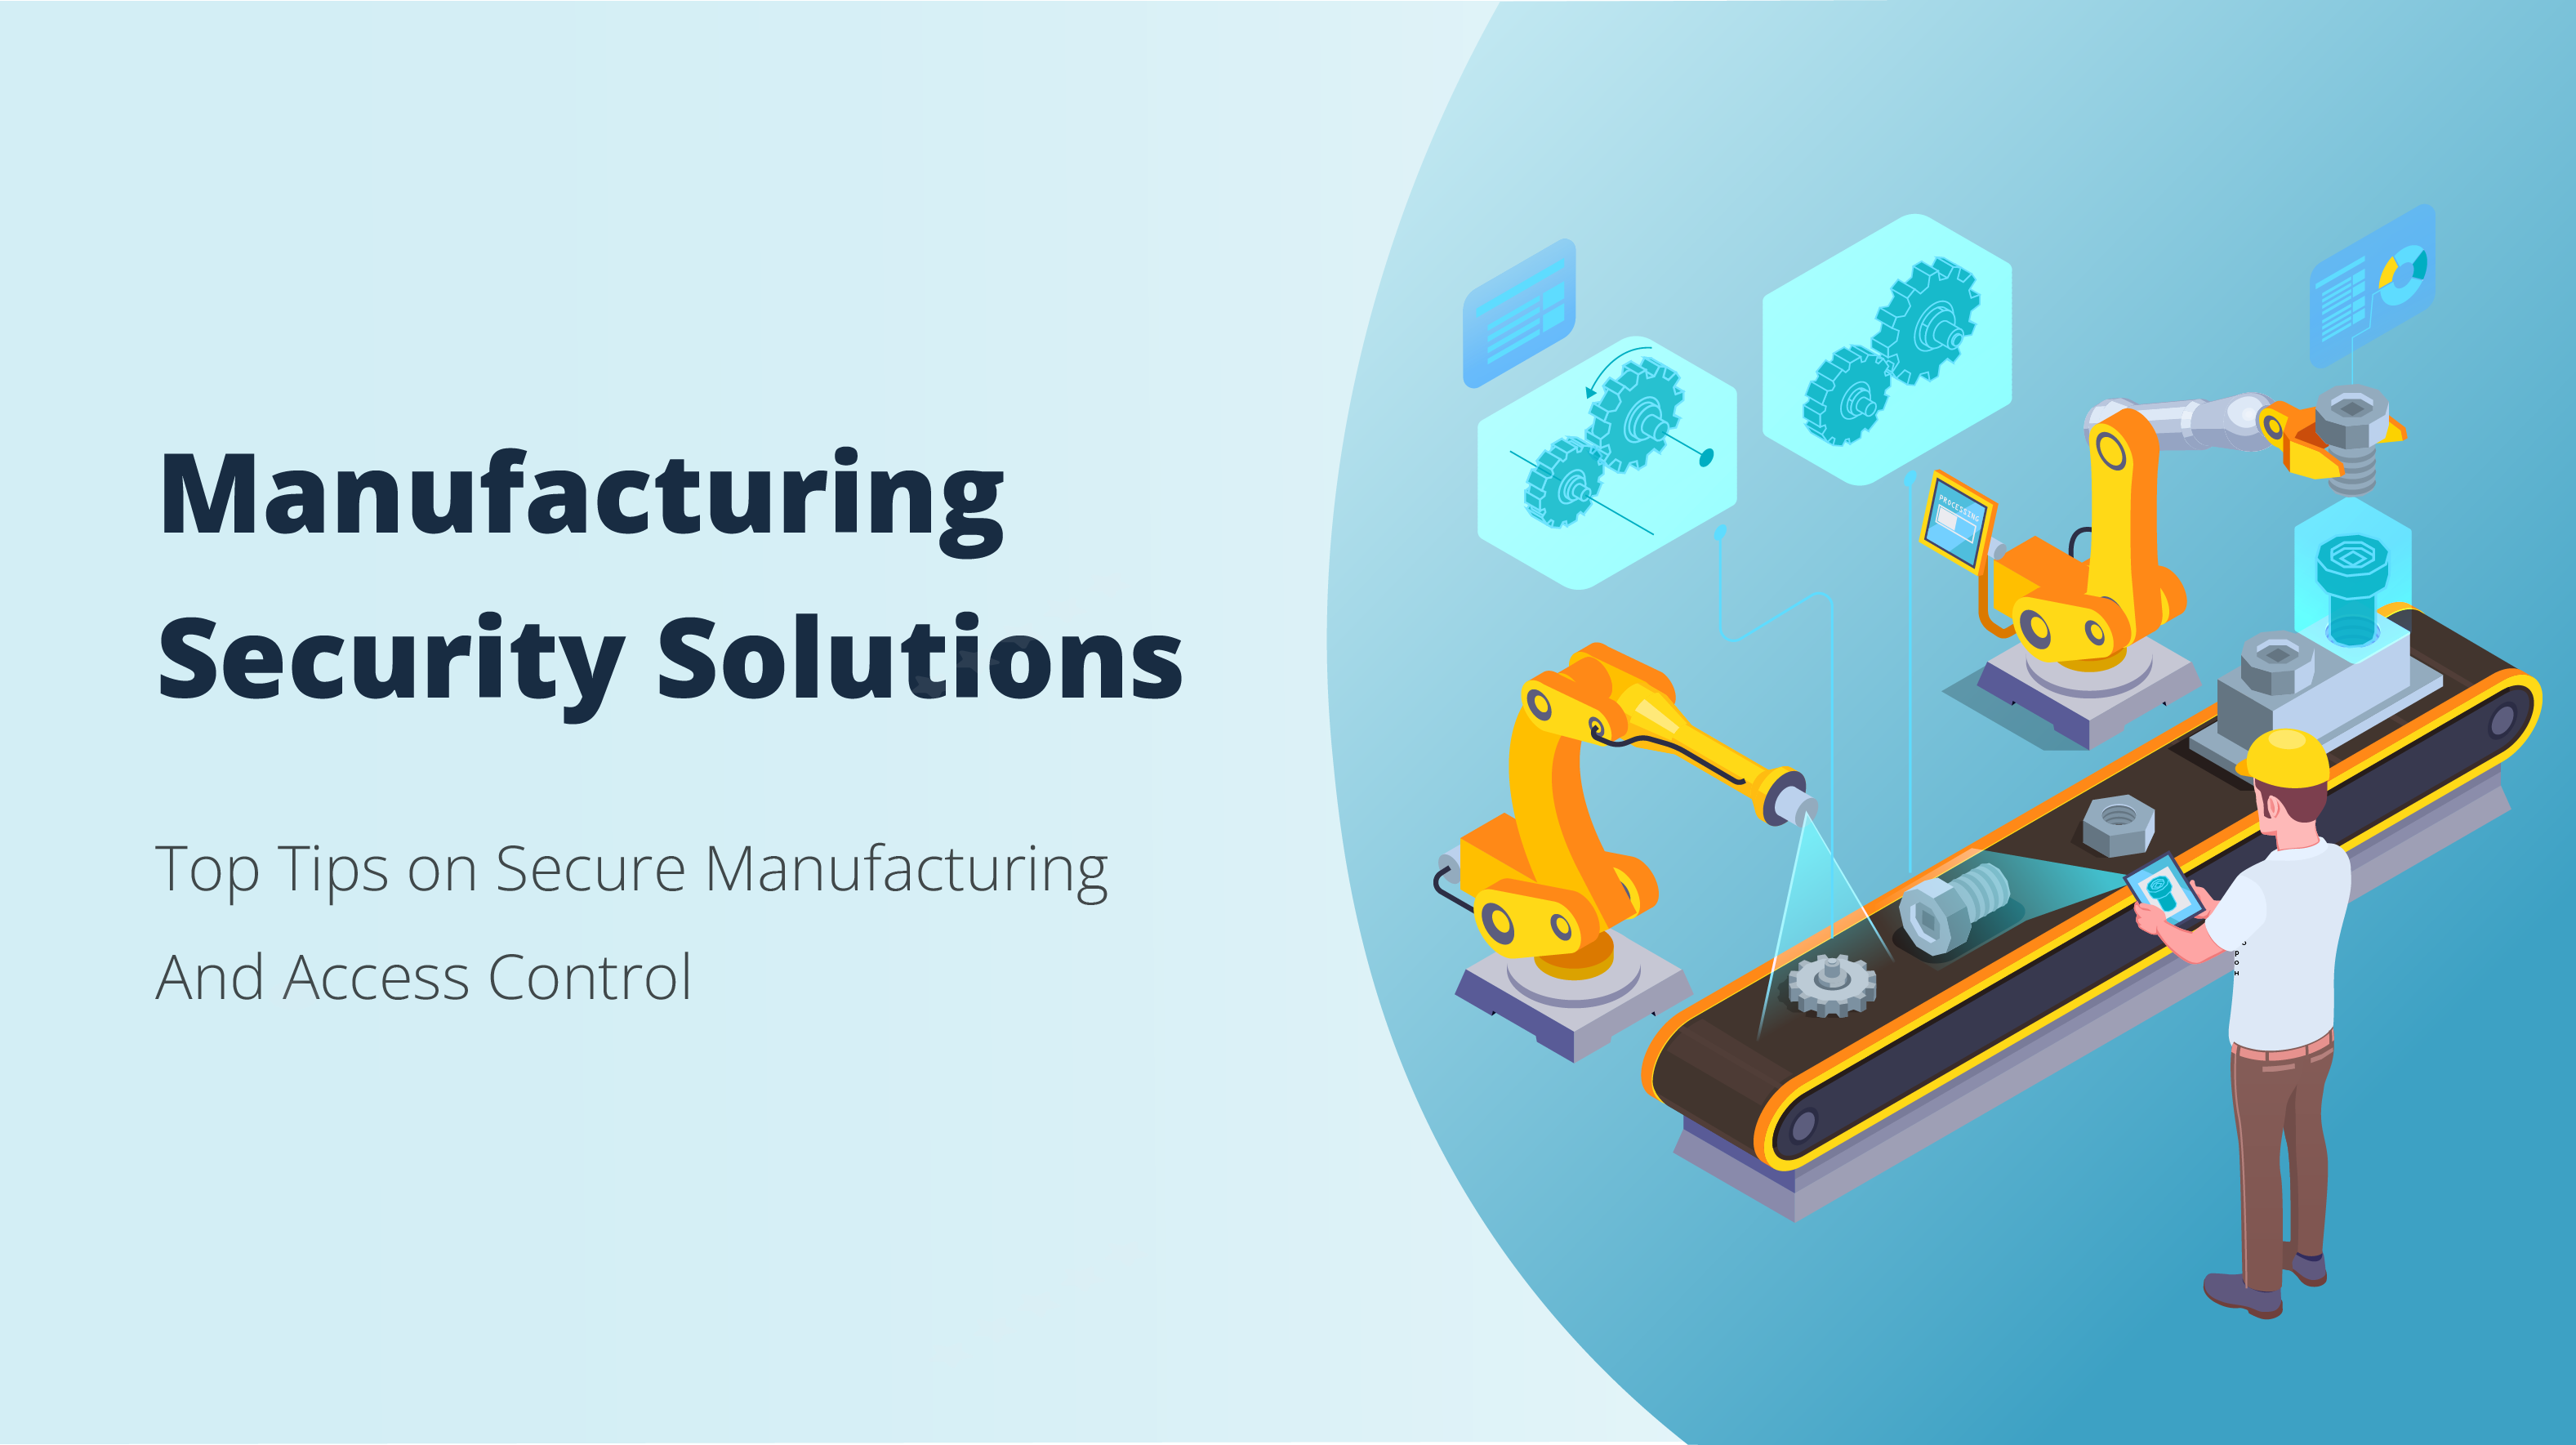 Manufacturing Security Solutions:  Top Tips on Secure Manufacturing & Access Control